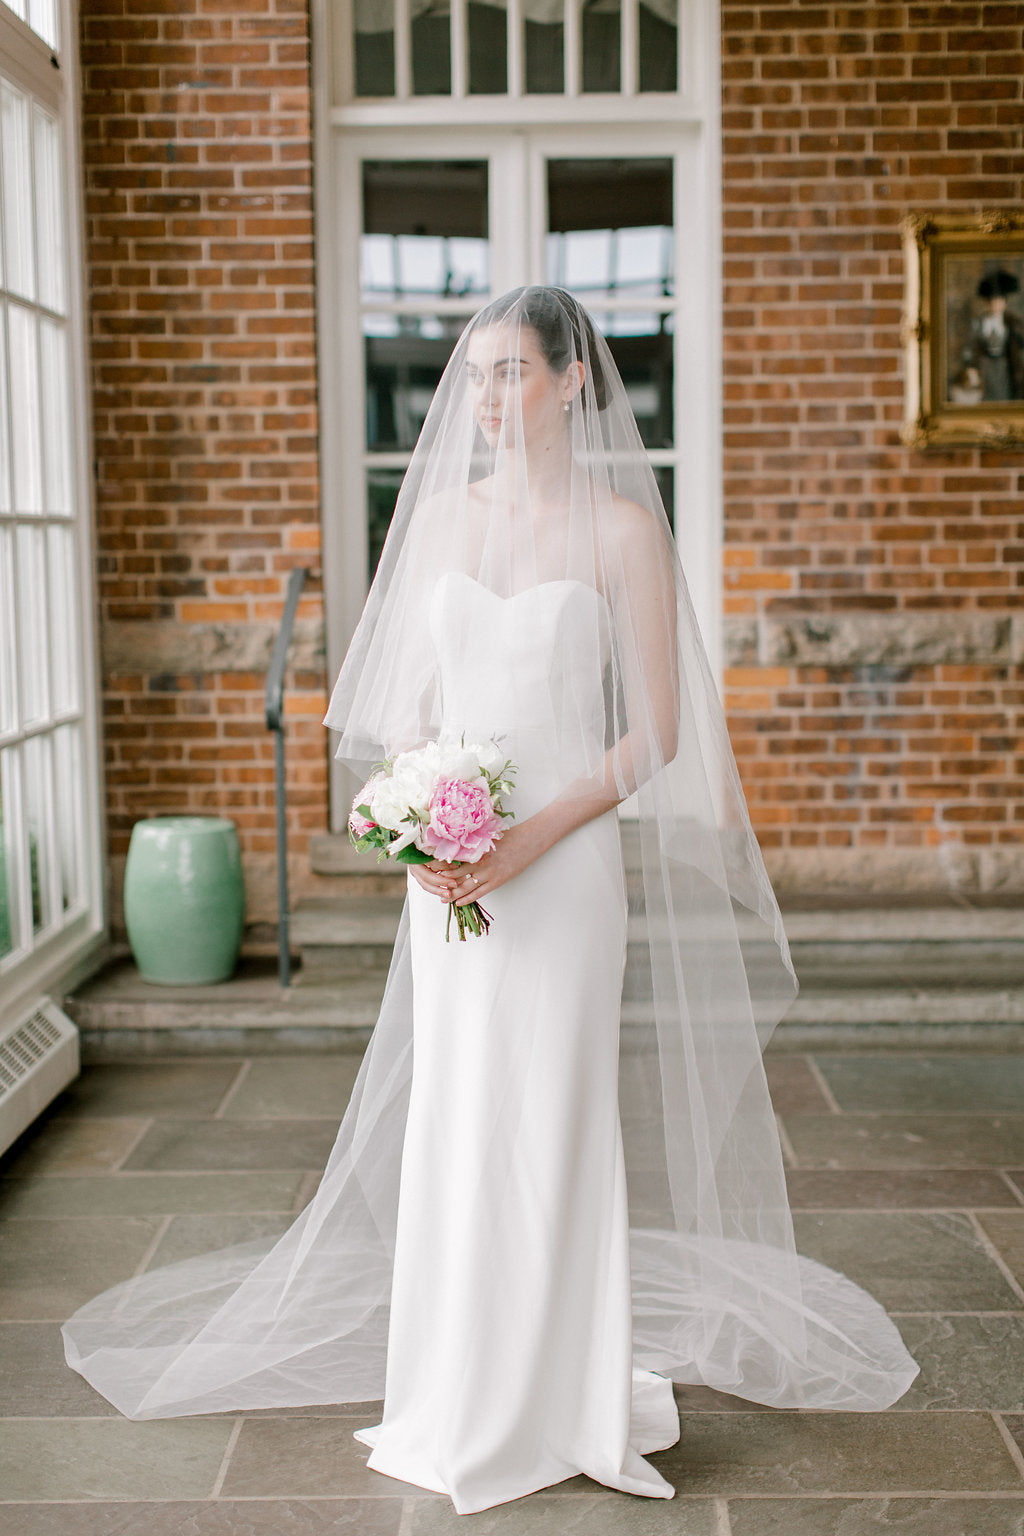 What Is A Wedding Veil Blusher?